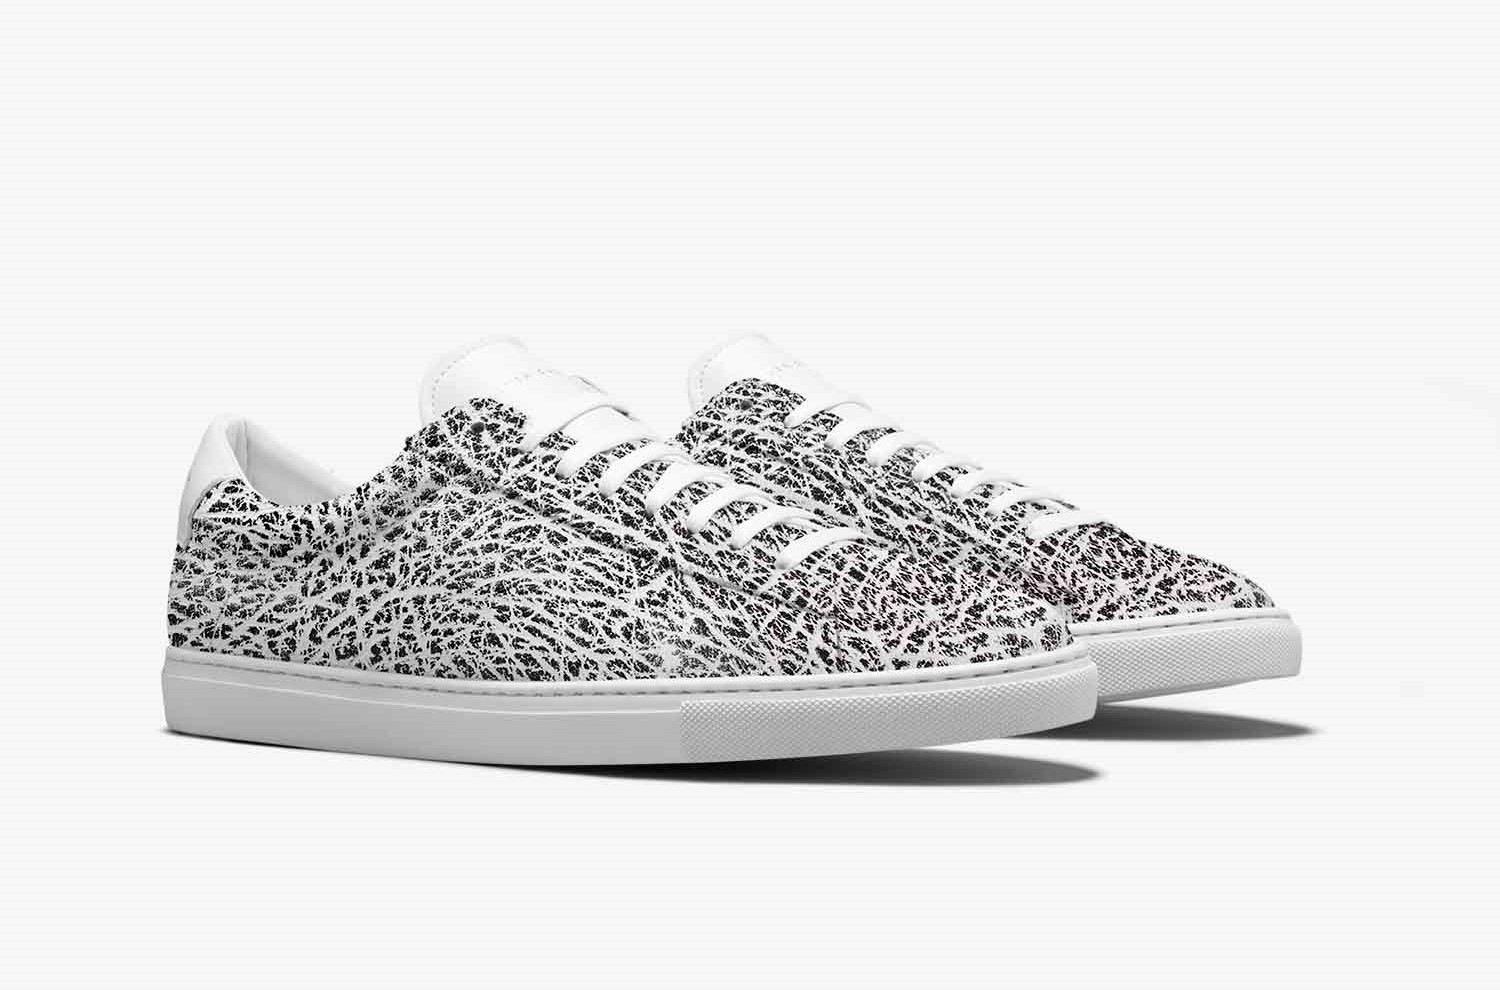 Remy Carriat Oliver Cabell Low 1